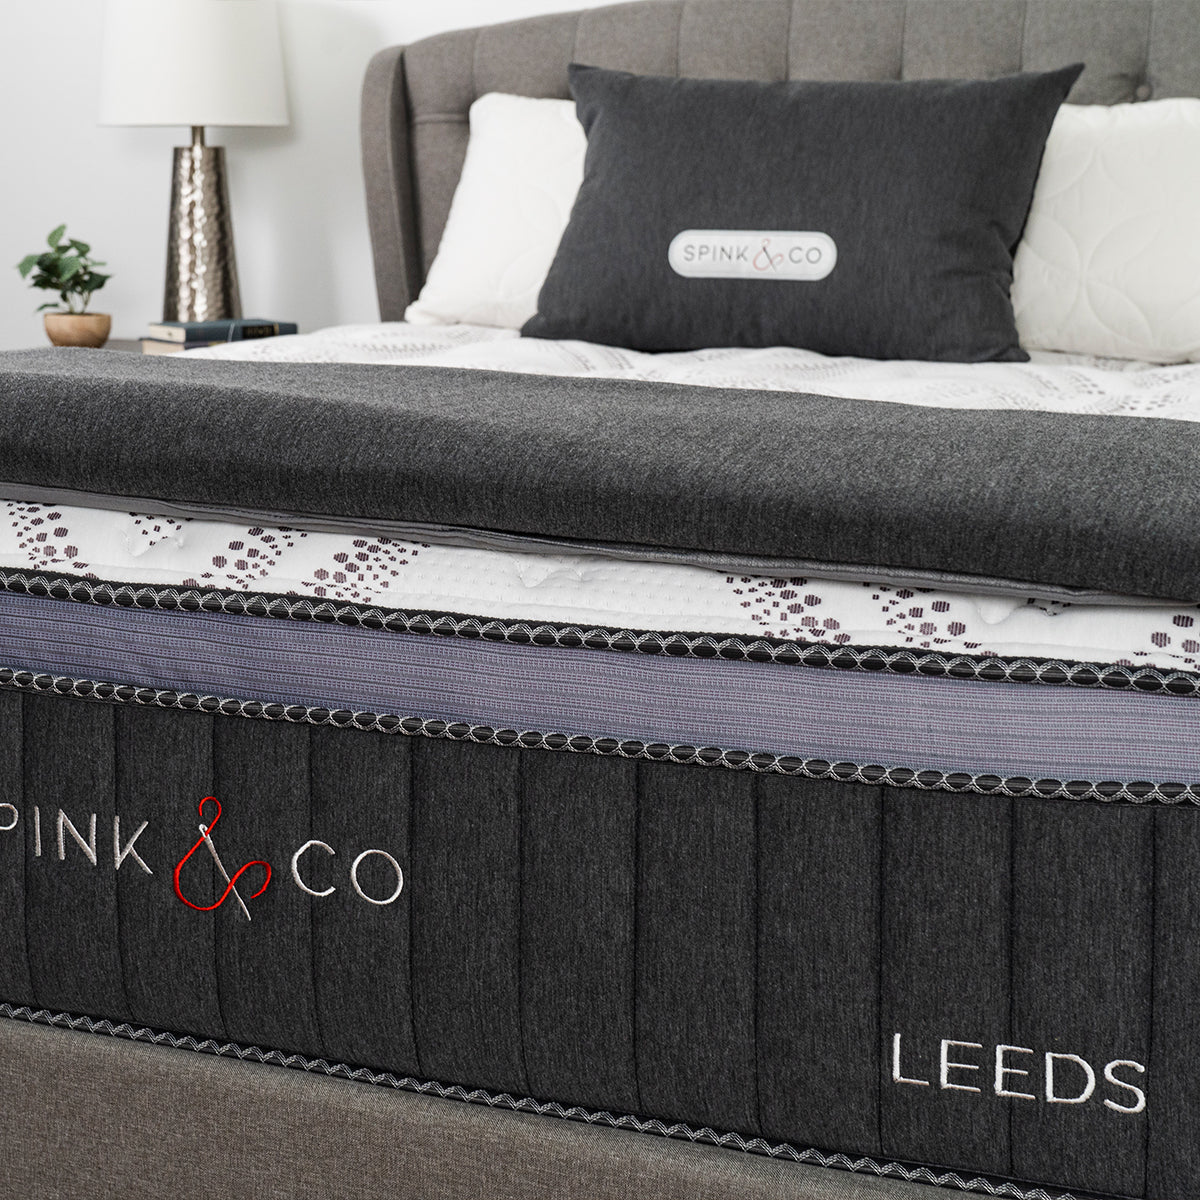 Spink & Co Leeds Luxury Firm mattress with gray throw blanket and pillows in clean modern bedroom. Closeup of hand stitched logo and bed name